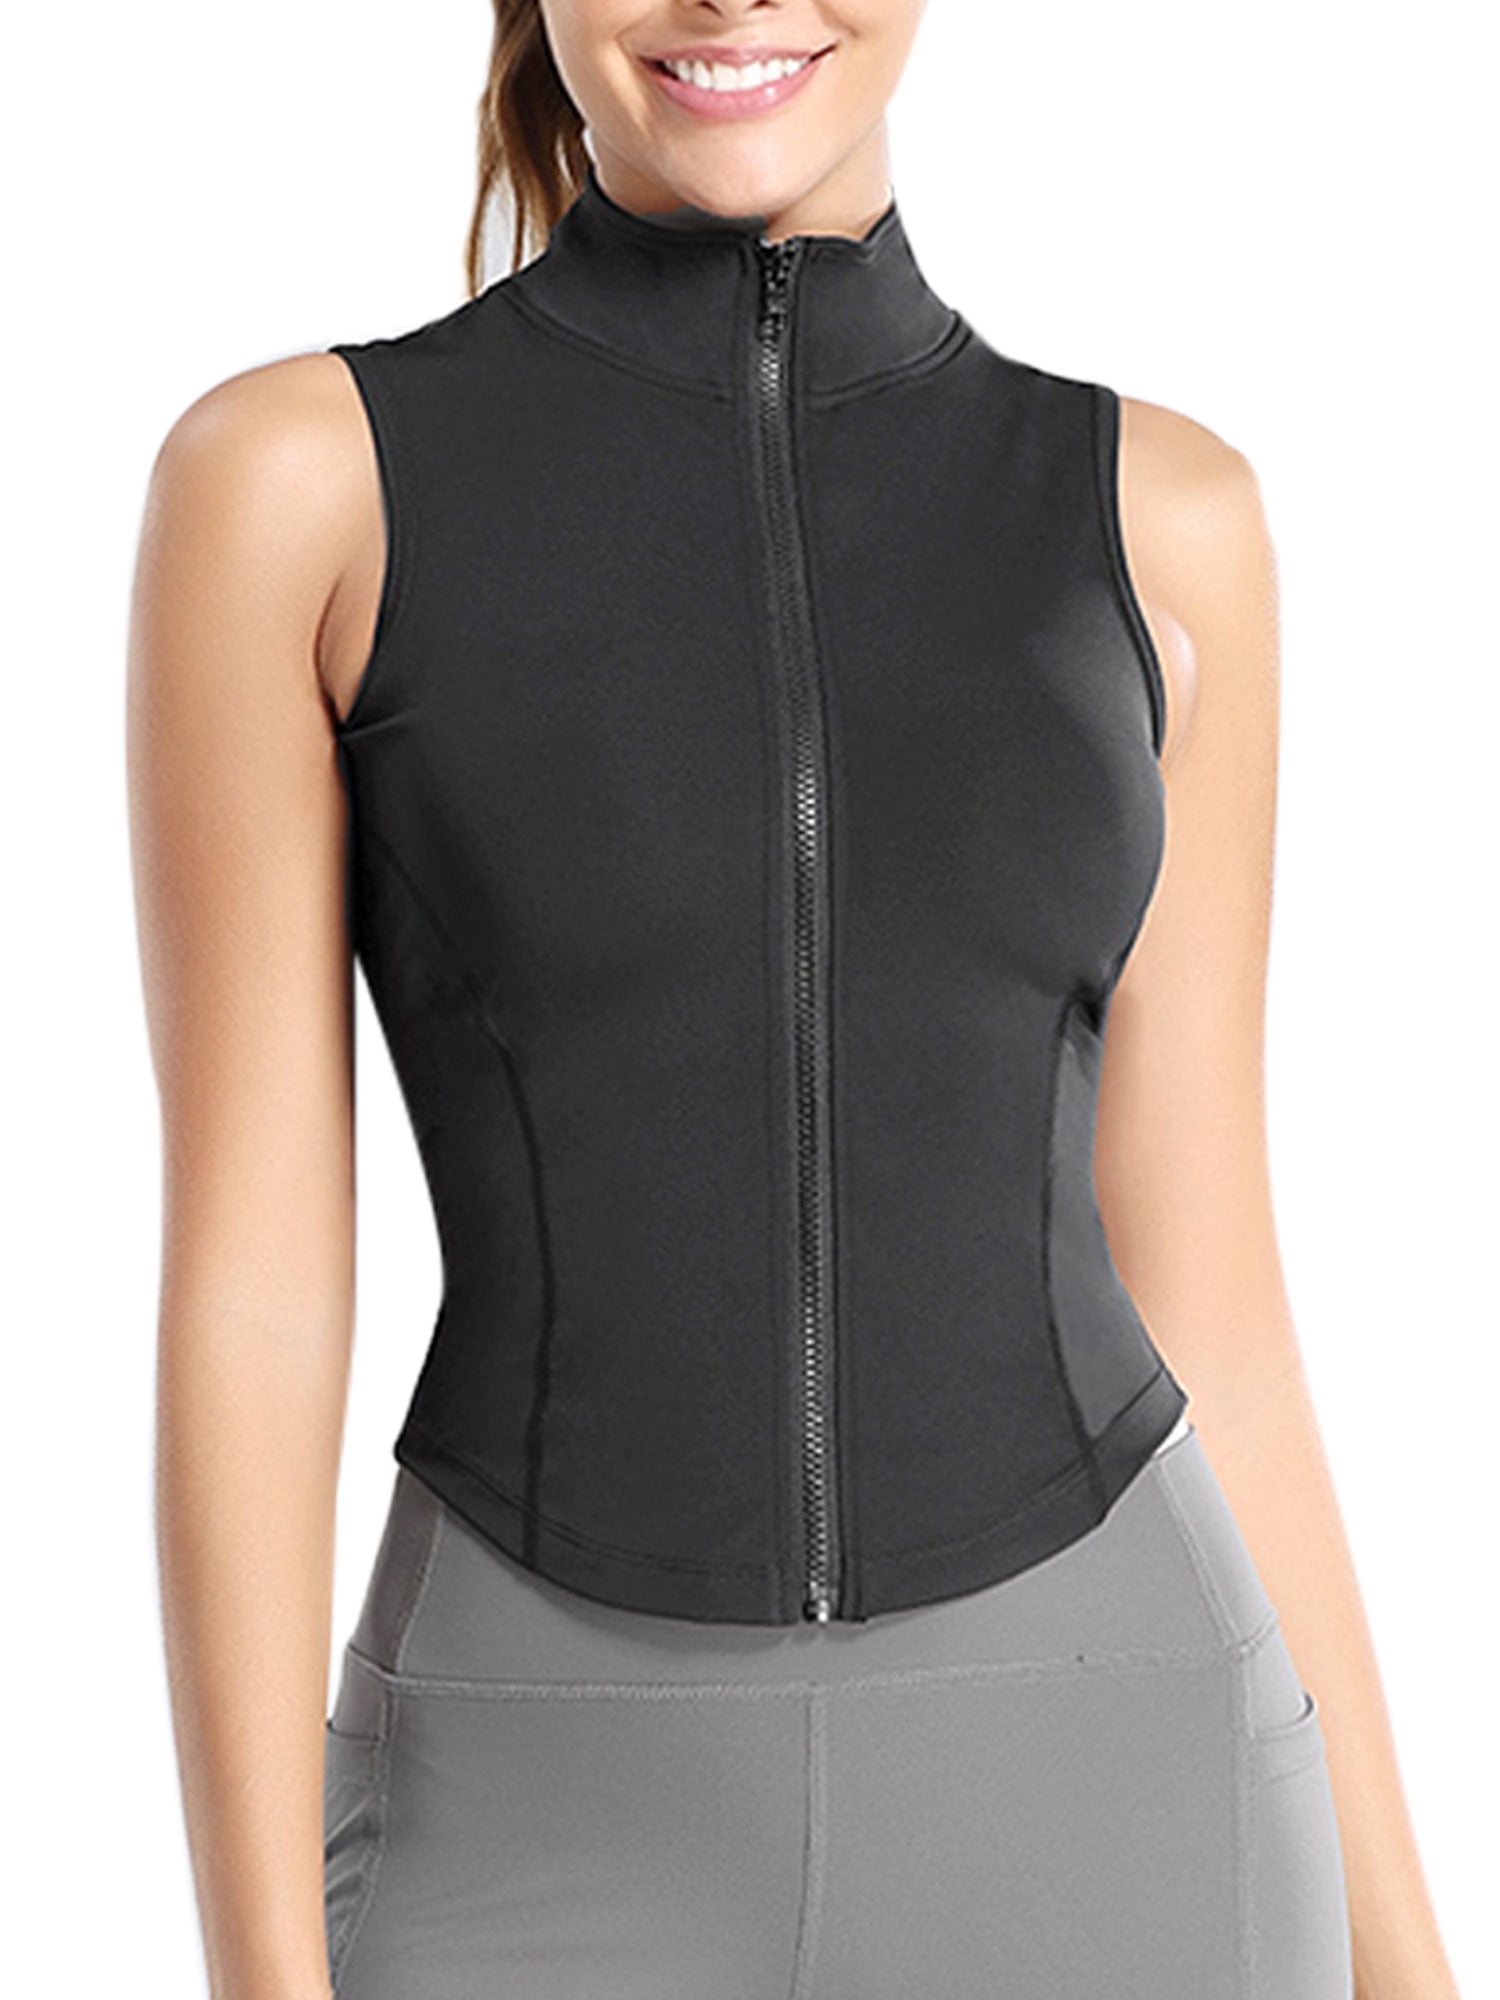 Women Lightweight Running Training Tummy Control Ruched Full Zip Mesh Compression Fit After Yoga Jacket 